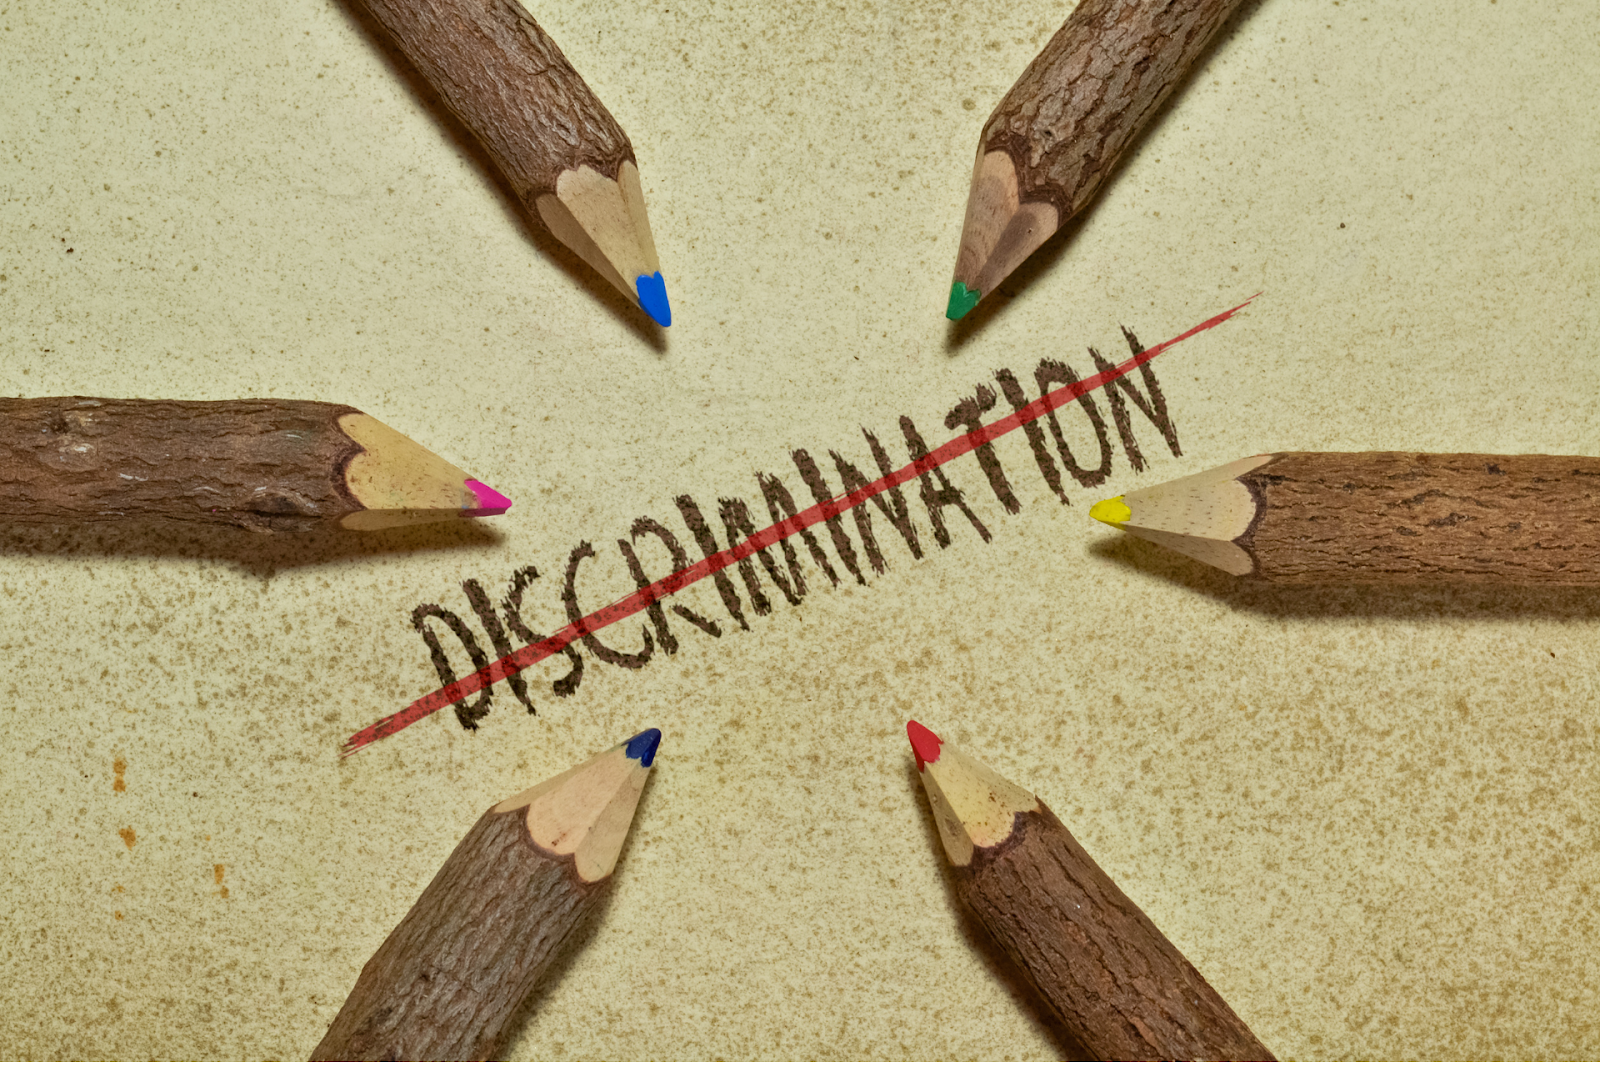  Sanctions For Any Acts Of Discrimination - Ad Culture